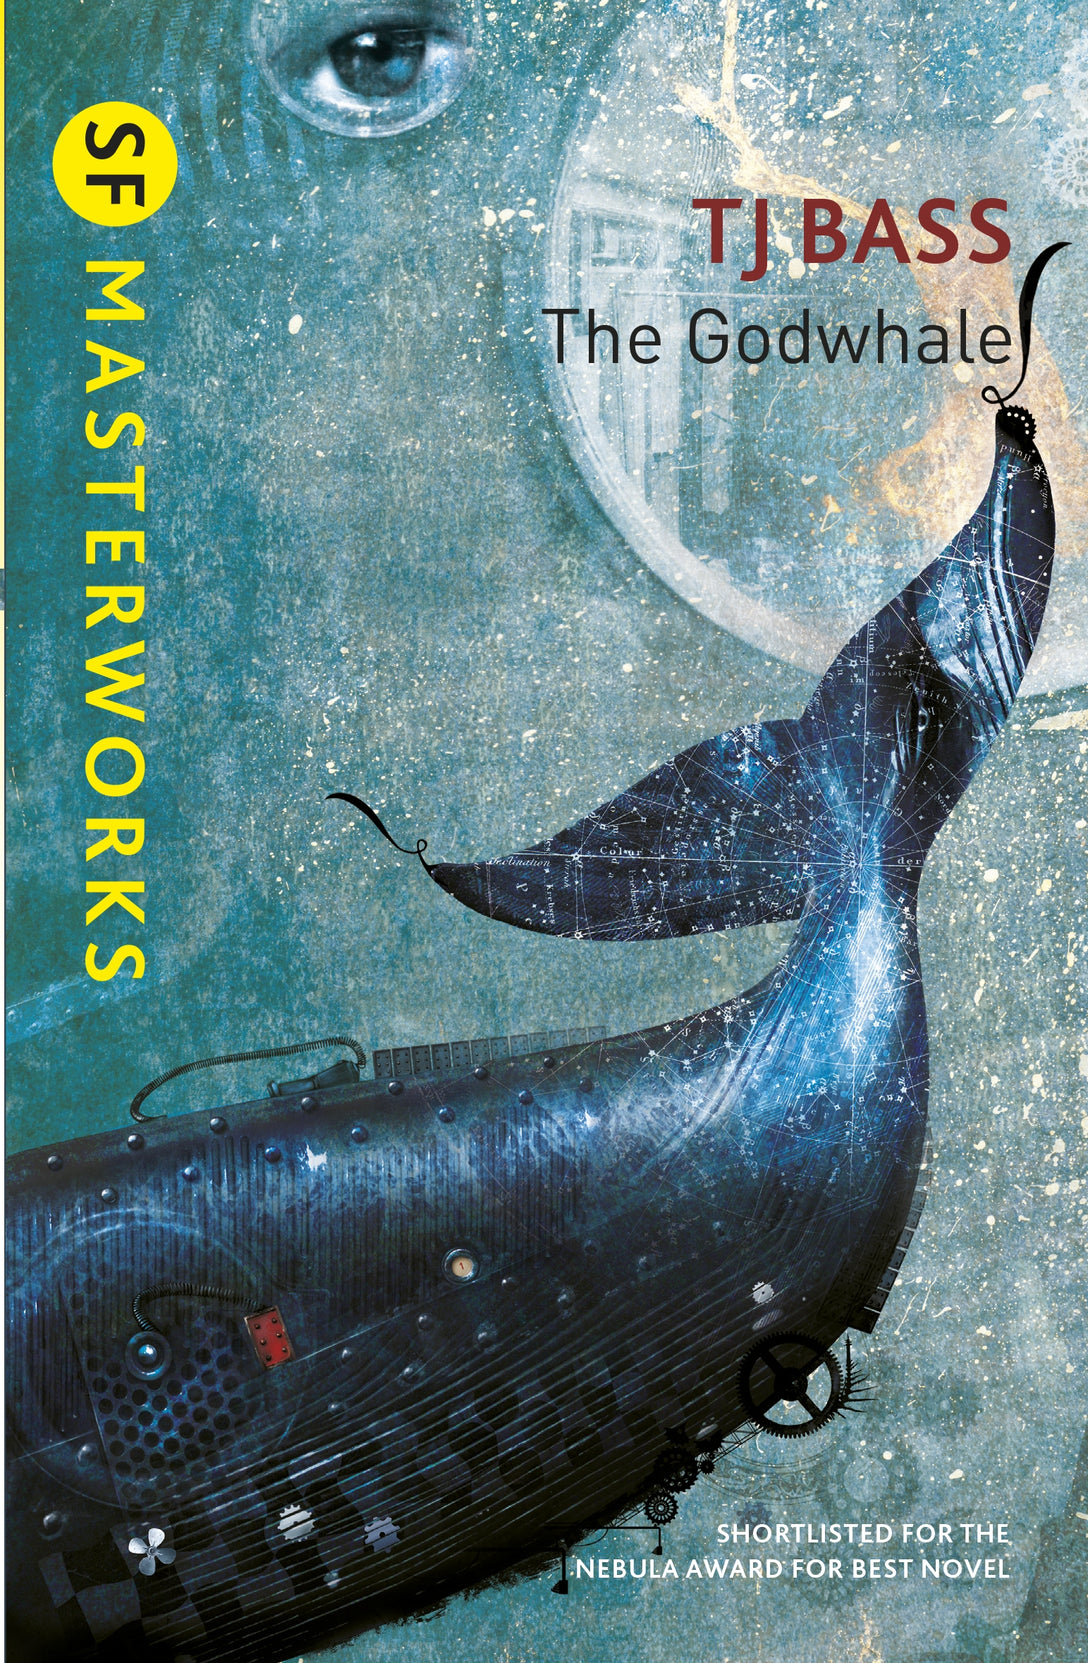 The Godwhale by T. J. Bass